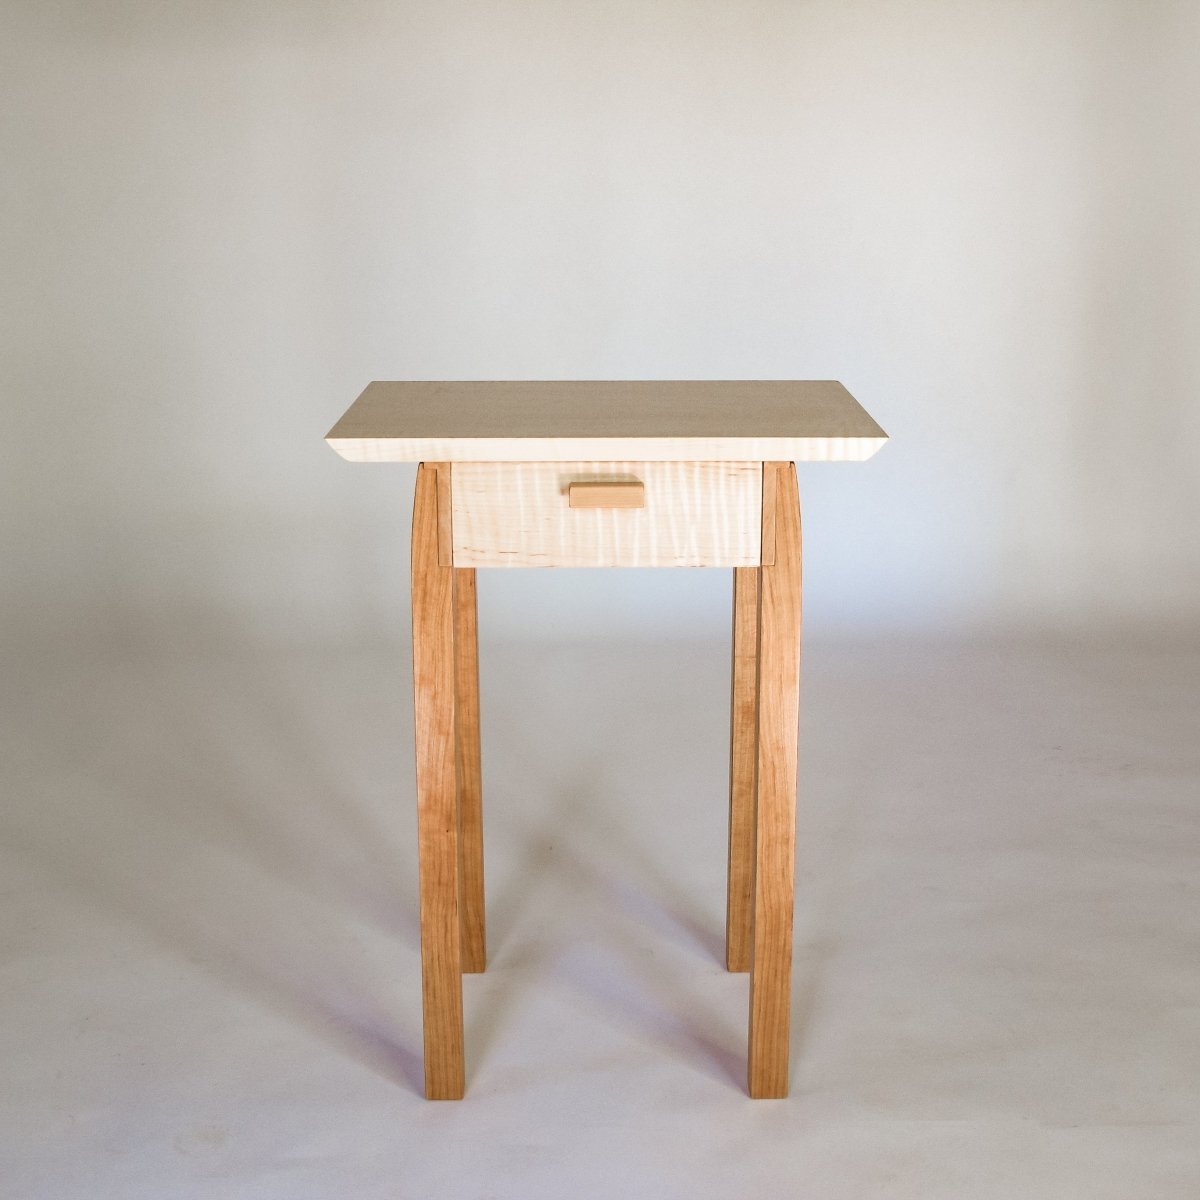 a small wooden table with drawer for your living room furniture or as a nightstand in a small bedroom design